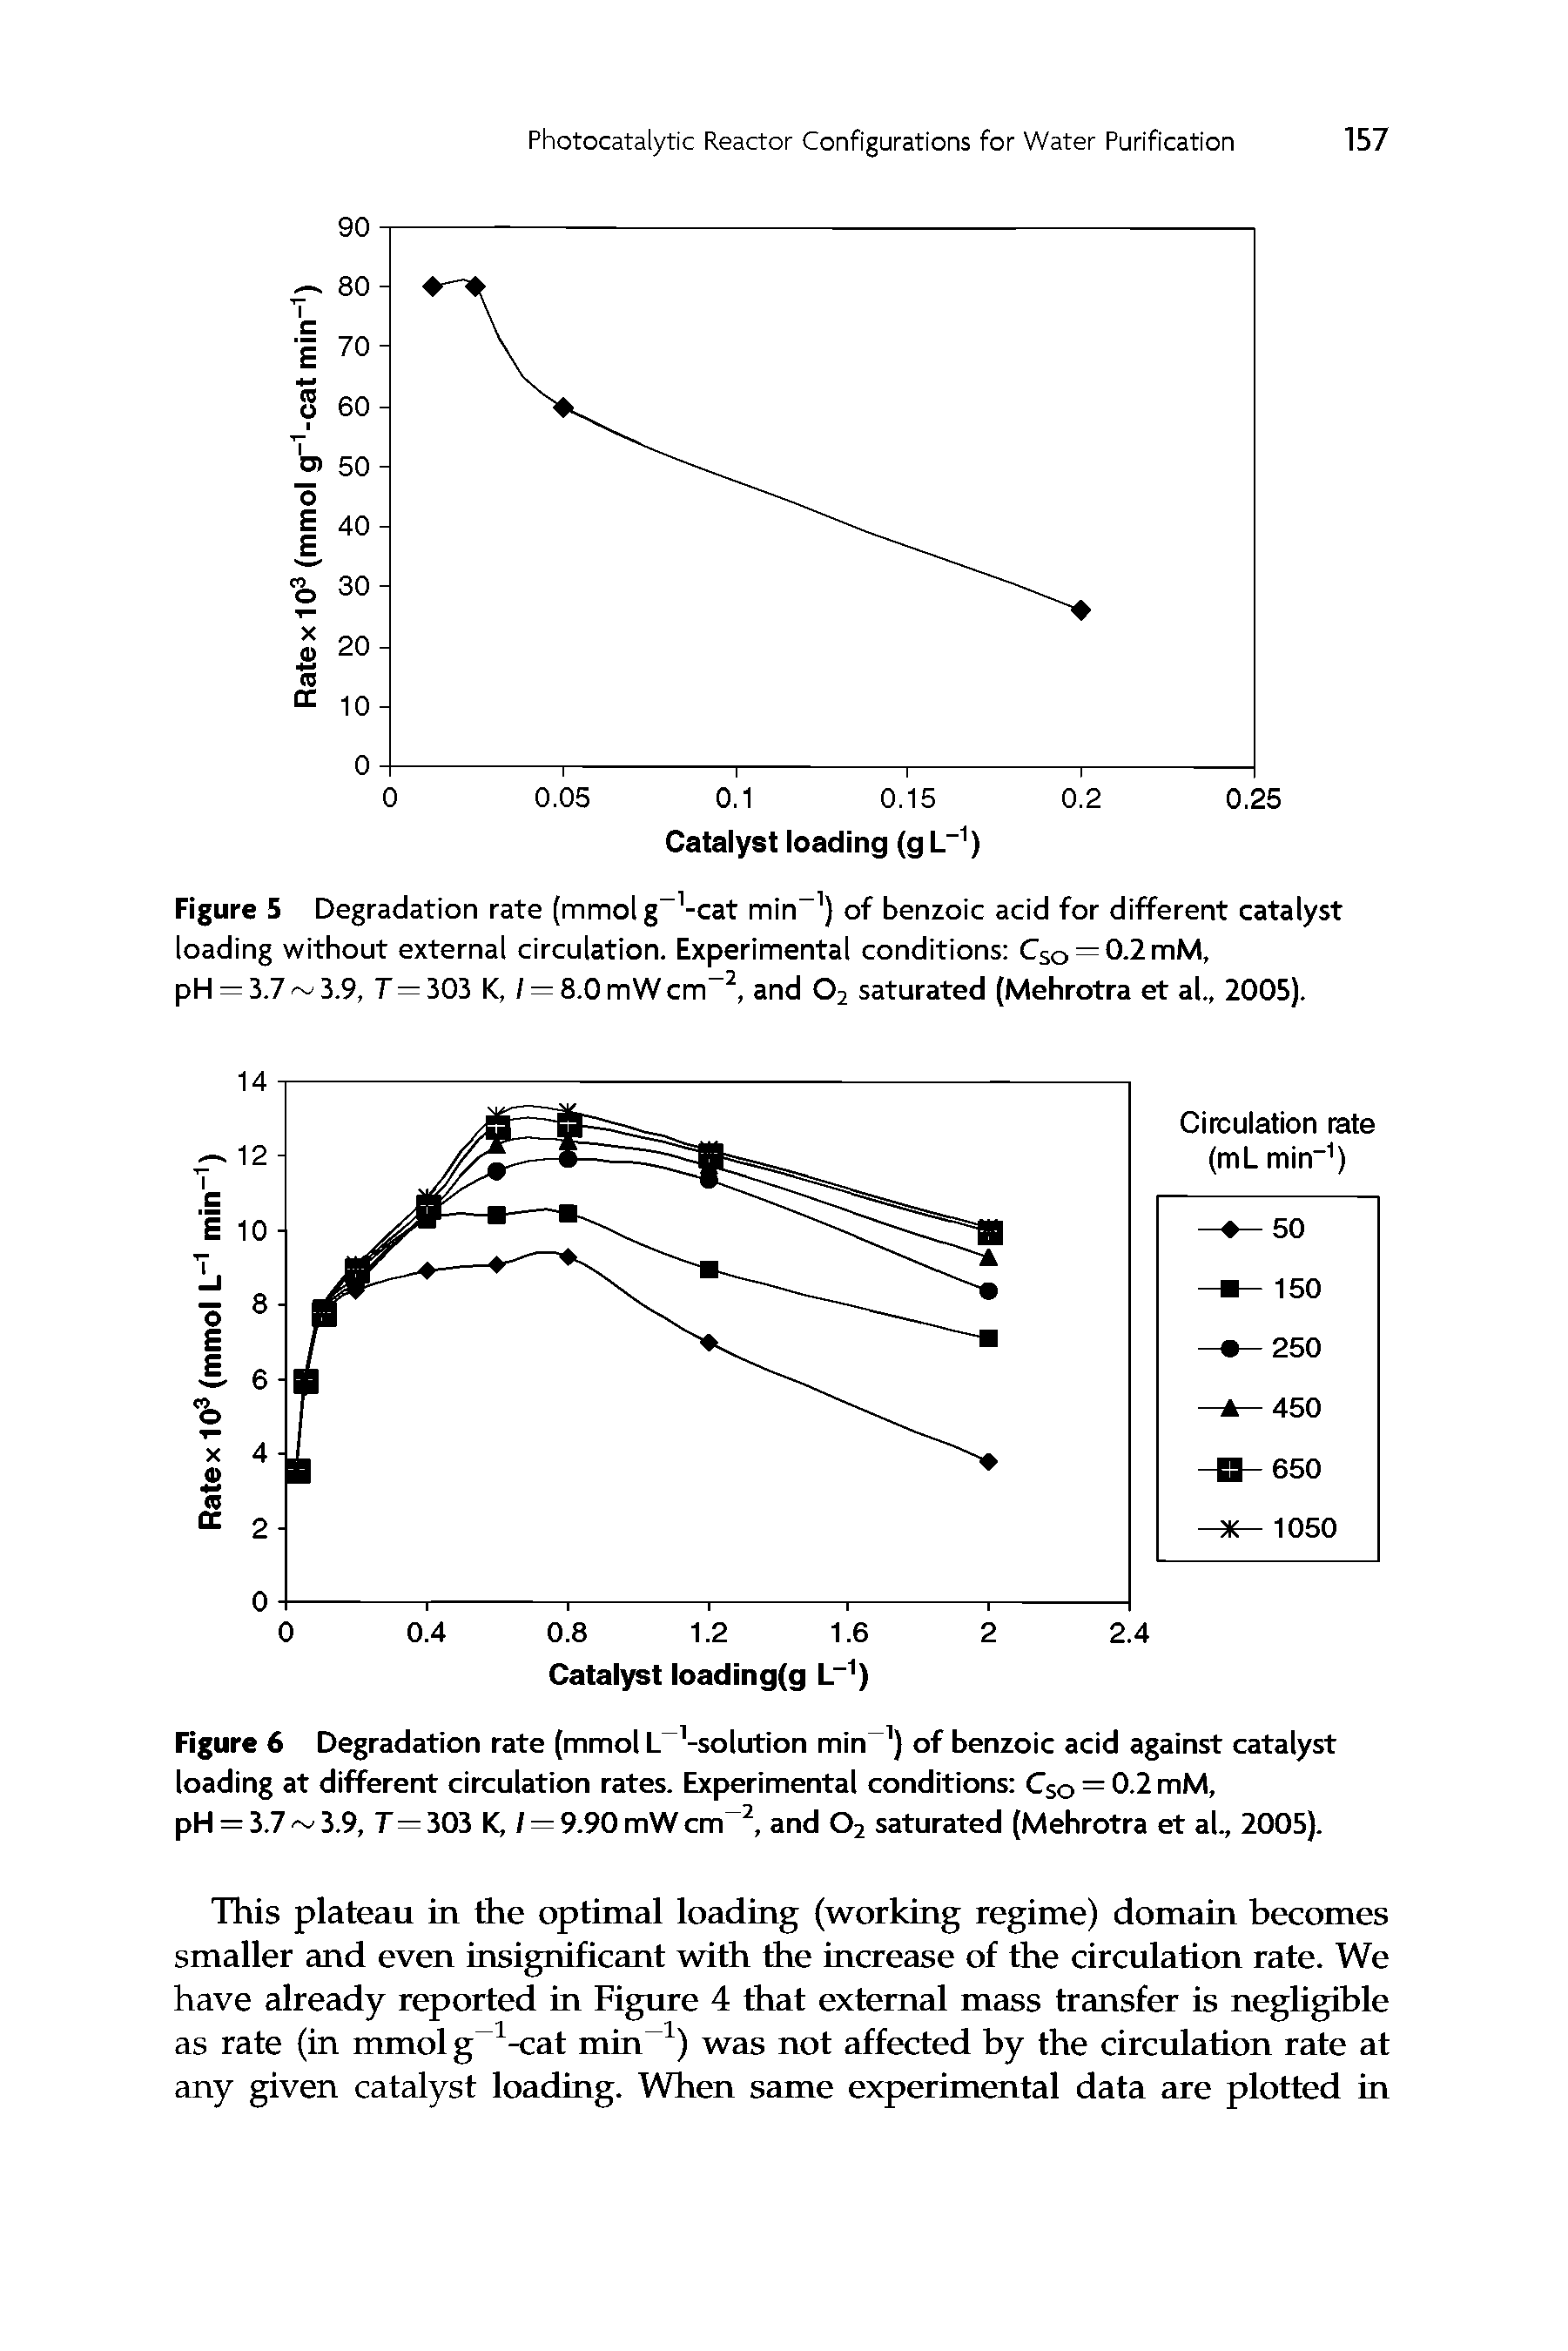 Figures Degradation rate (mmol g -cat min ) of benzoic acid for different catalyst loading without external circulation. Experimental conditions Cso = 0.2mM, pH = 3.7 3.9,7 = 303 K, / = 8.0 mW cm and O2 saturated (Mehrotra et al., 2005).